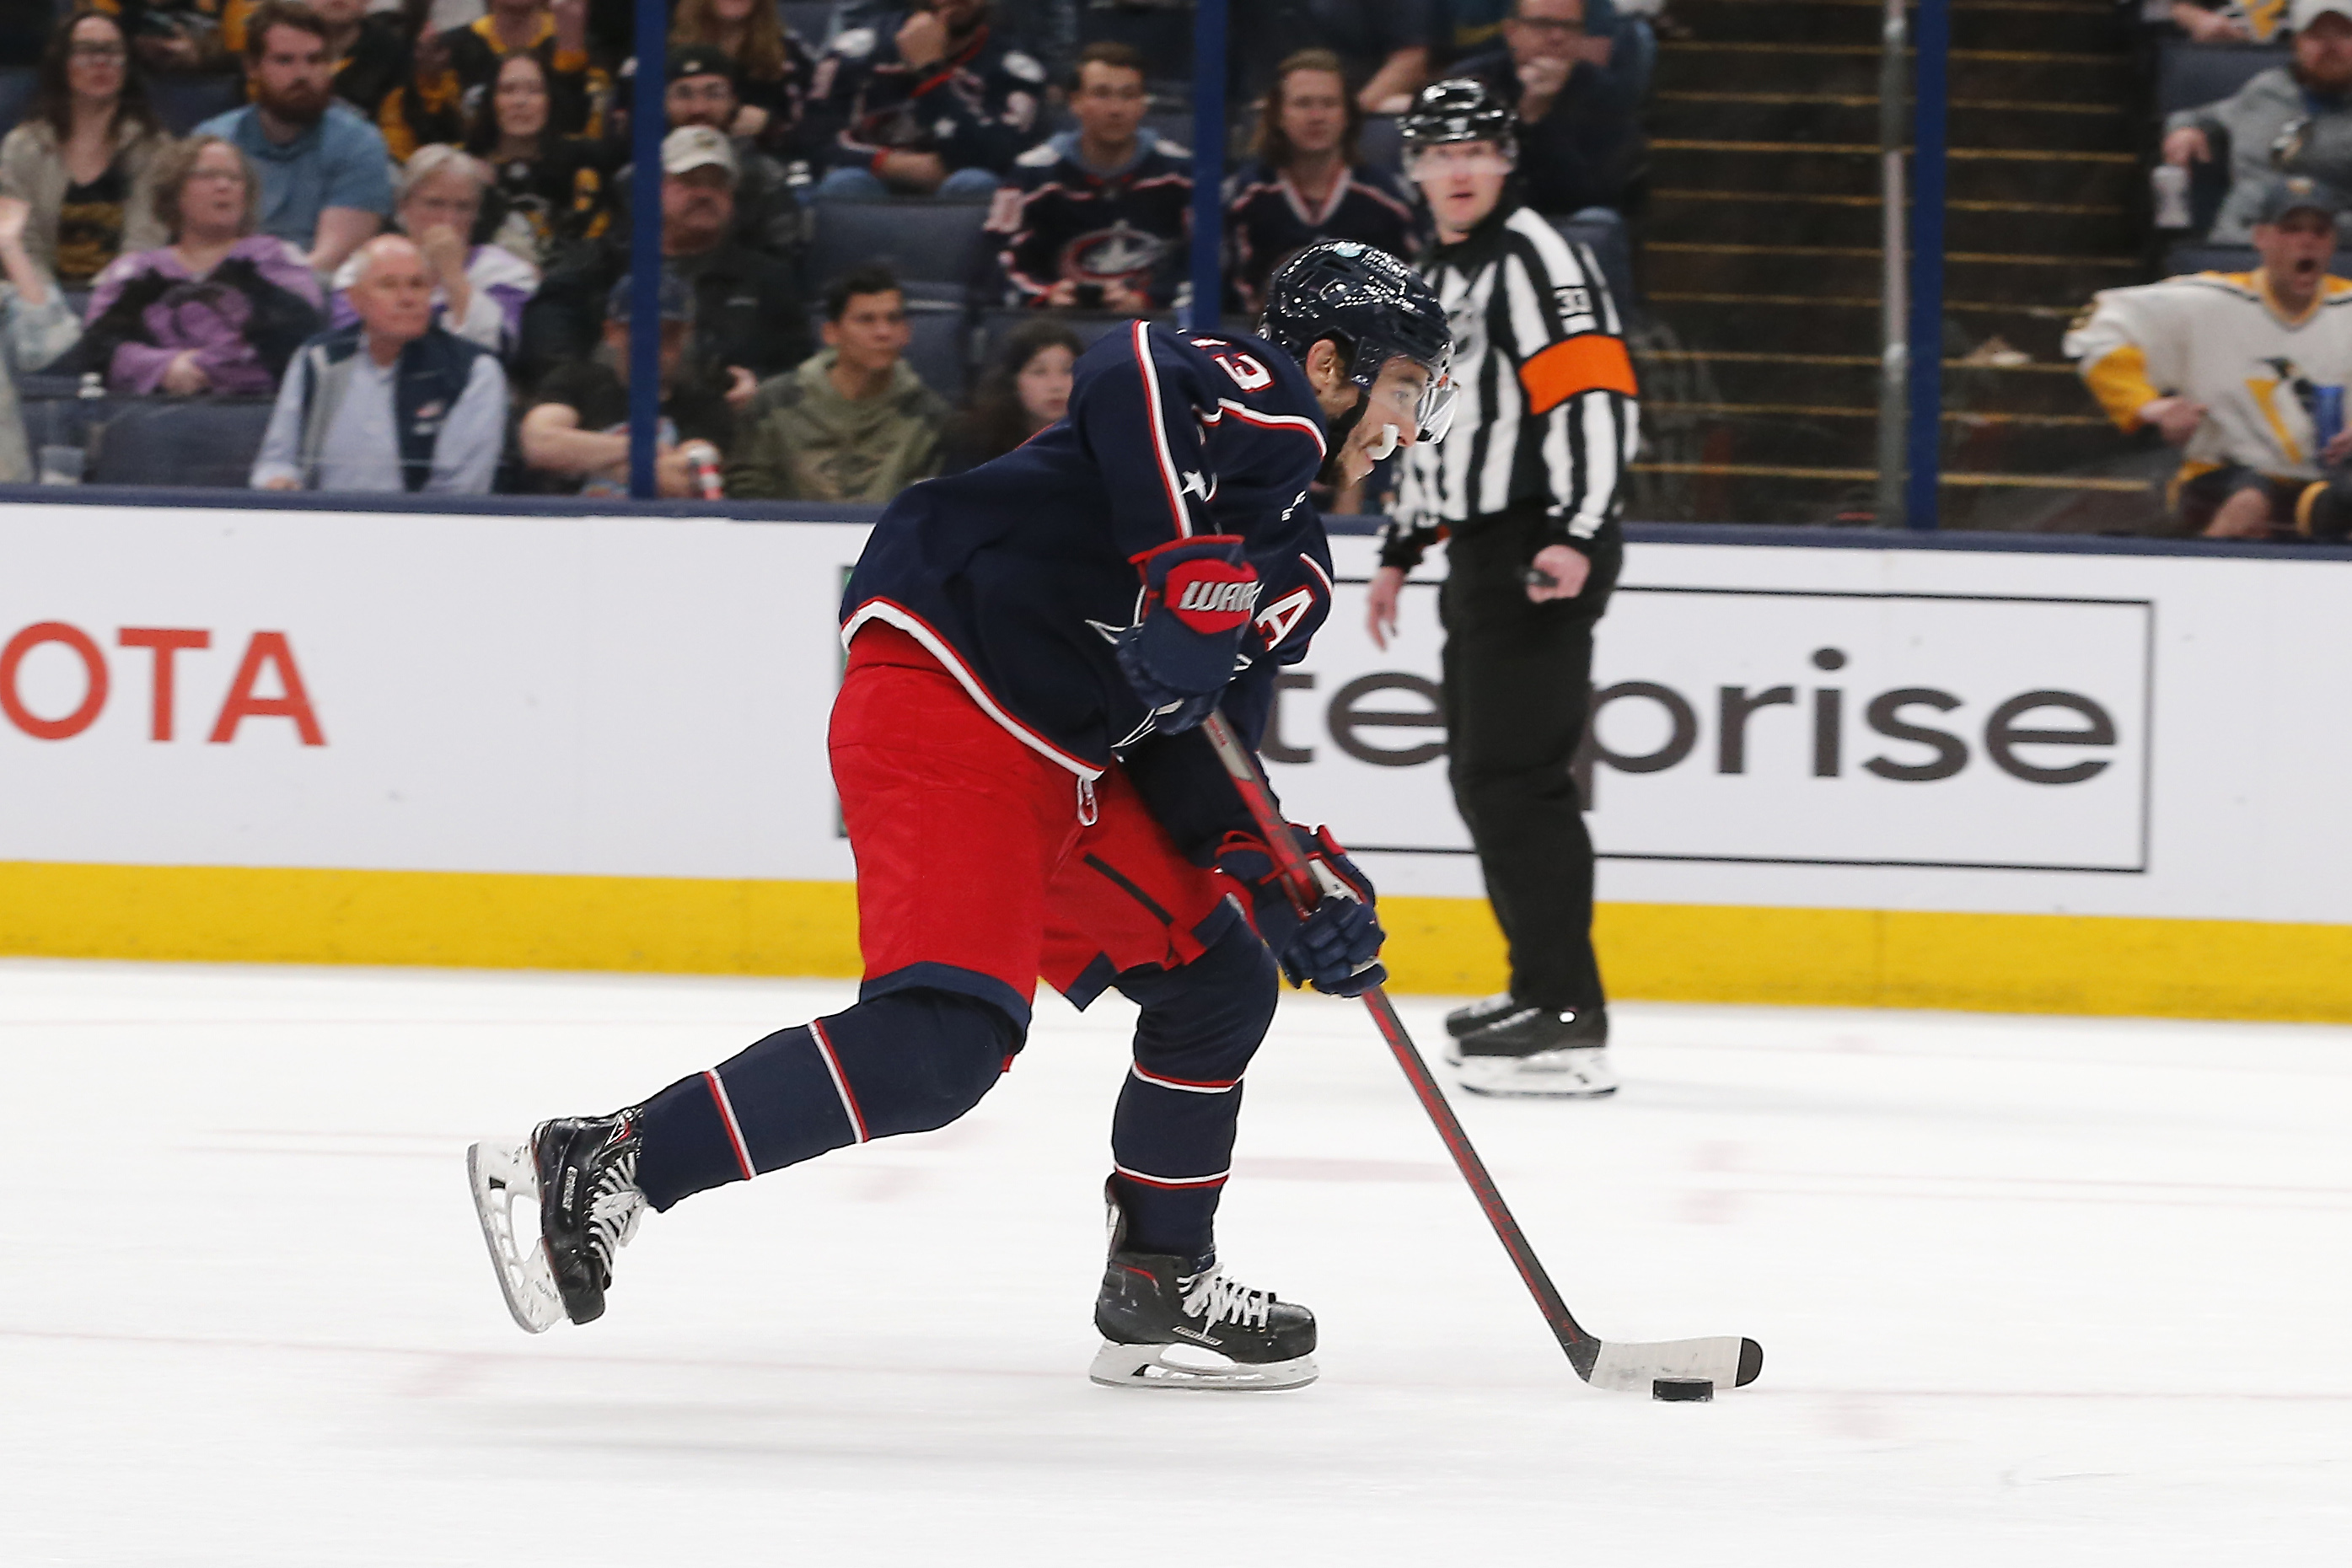 Johnny Gaudreau has no second thoughts as Blue Jackets' season